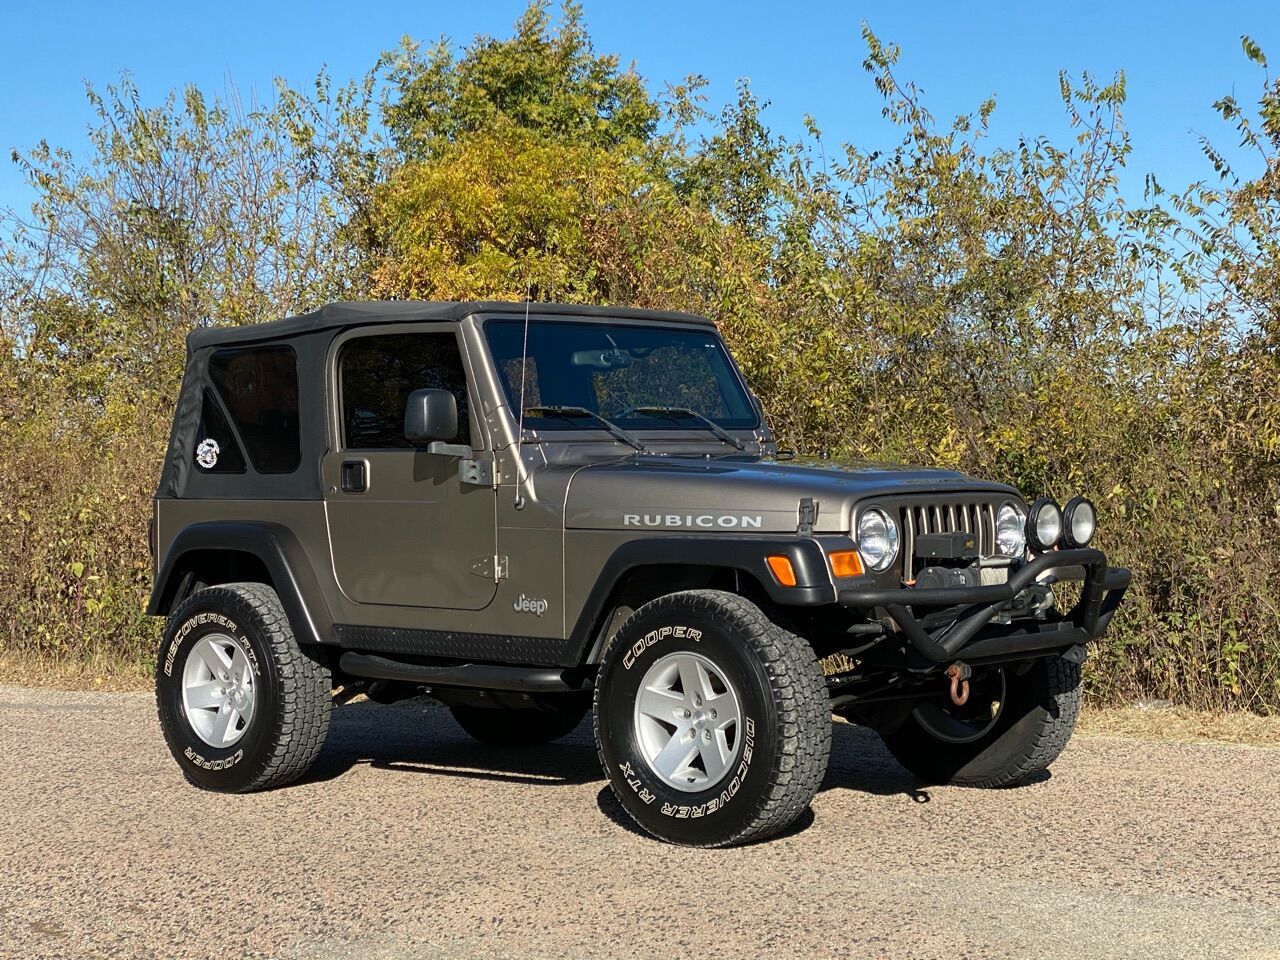 2004 Jeep Wrangler For Sale In Texas ®